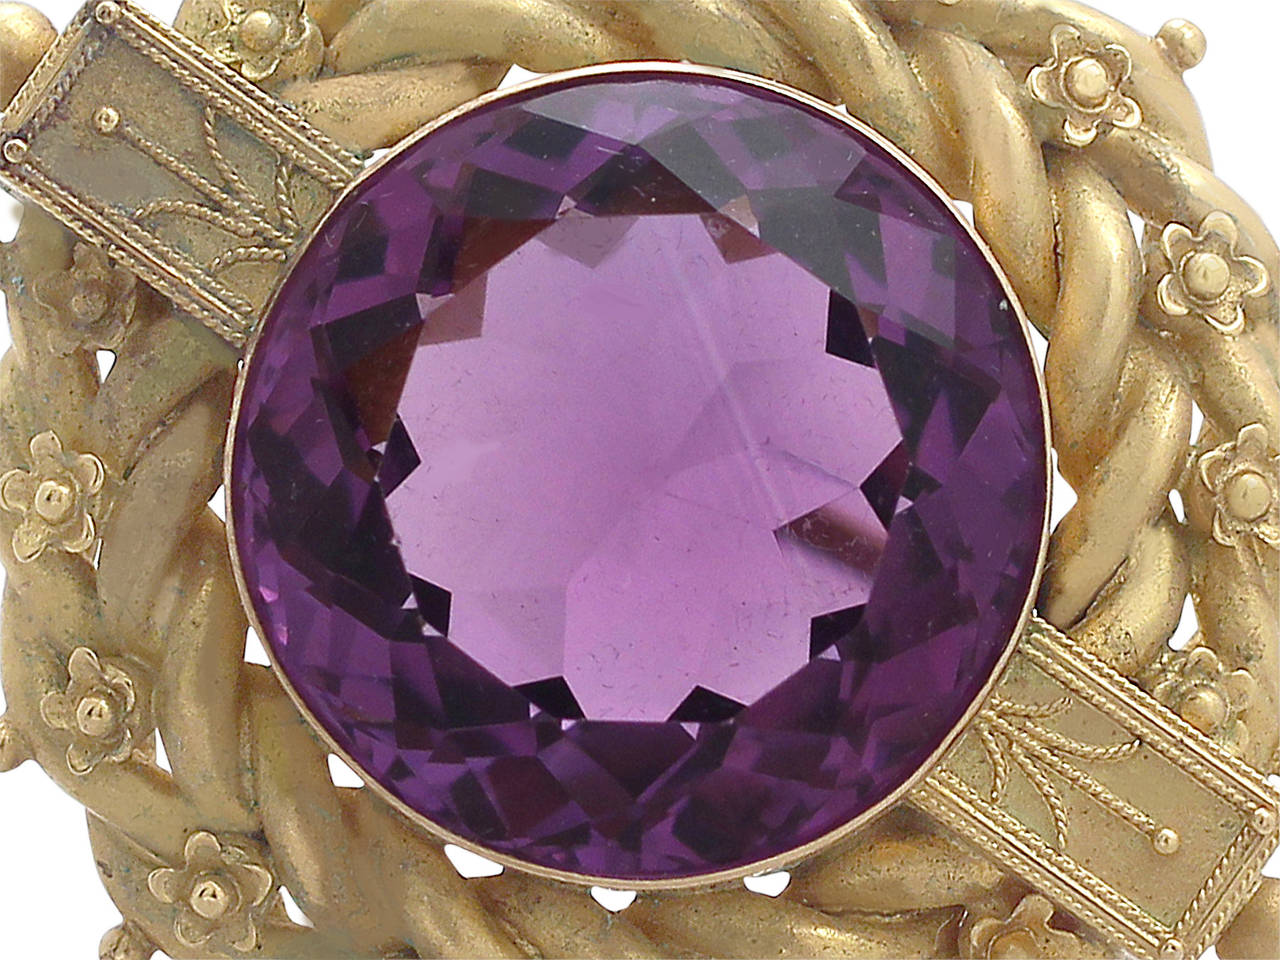 A fine and impressive antique Victorian 18.91 carat natural amethyst and 20 karat yellow gold brooch; part of our antique jewelry and estate jewelry collections

This impressive antique Victorian amethyst brooch has been crafted in 20k yellow